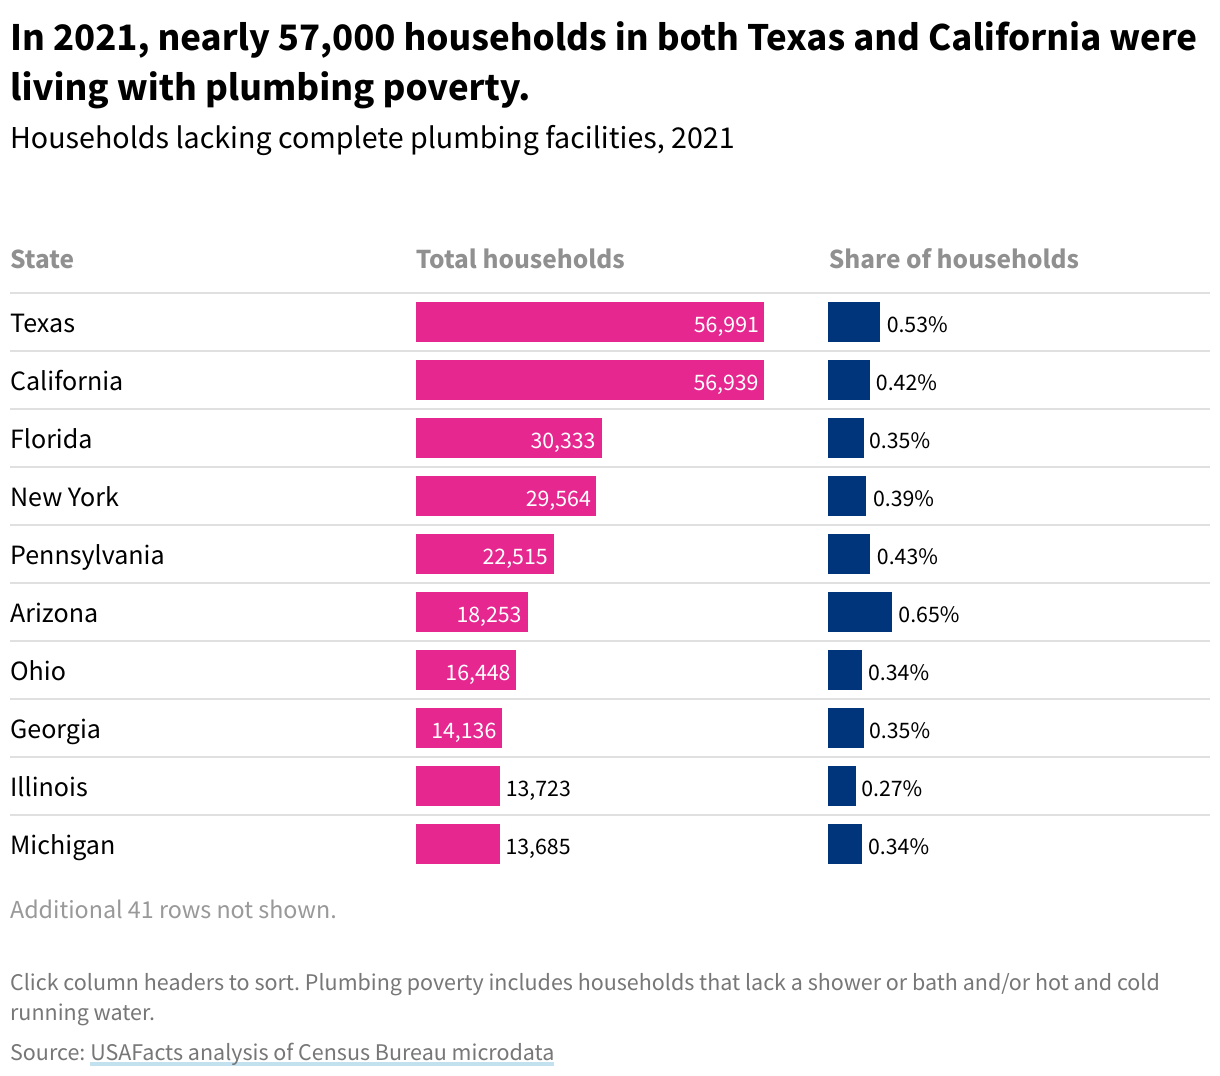 Table showing households lacking complete plumbing facilities in 2021. Texas has the most households in plumbing poverty with 56,991. 